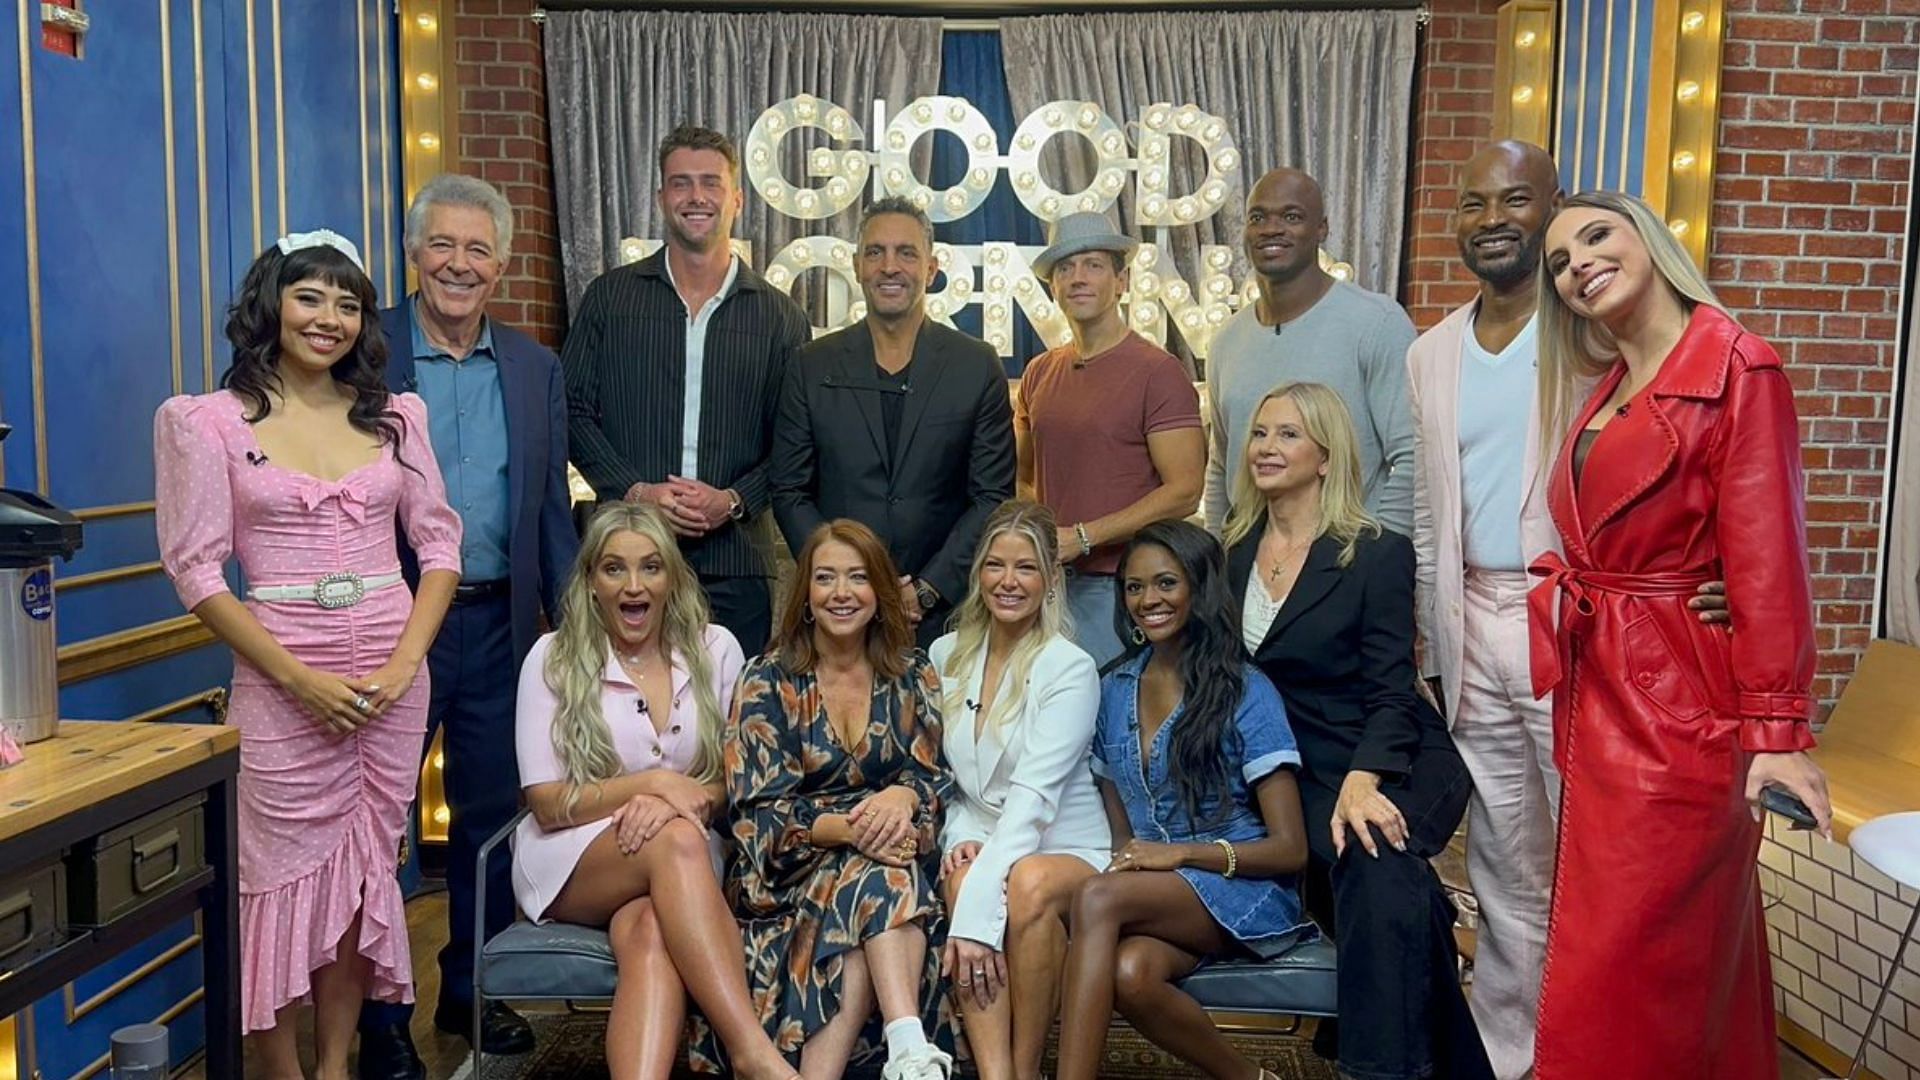 DWTS announced full season 32 cast on Good Morning America. (Image via X/@HarryJowsey)